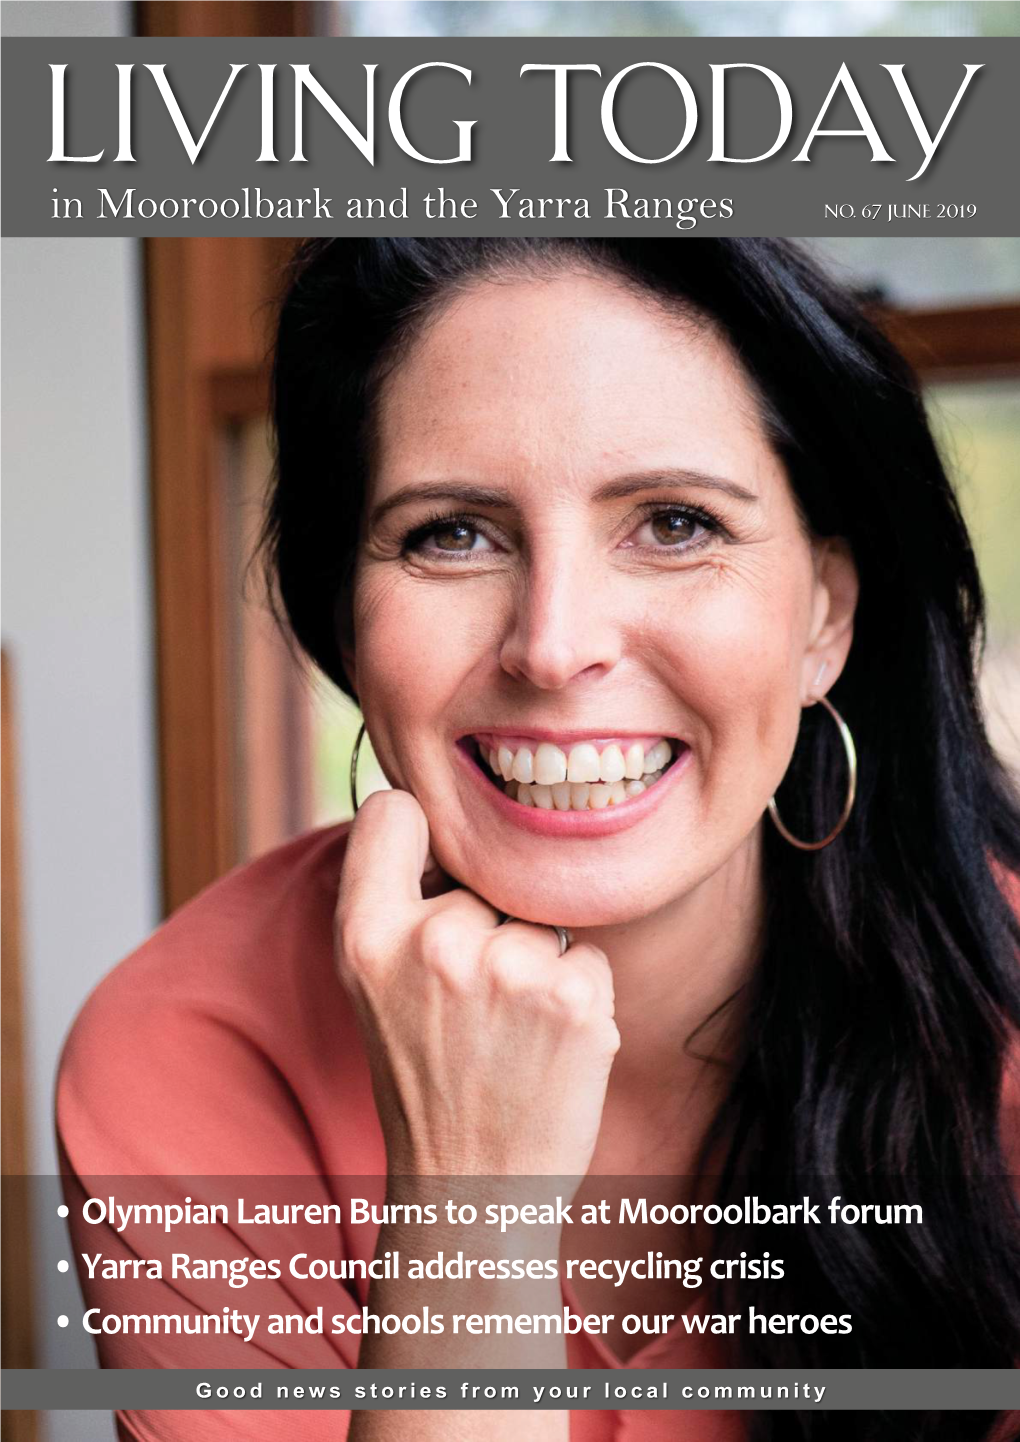 Olympian Lauren Burns to Speak at Mooroolbark Forum • Yarra Ranges Council Addresses Recycling Crisis • Community and Schools Remember Our War Heroes